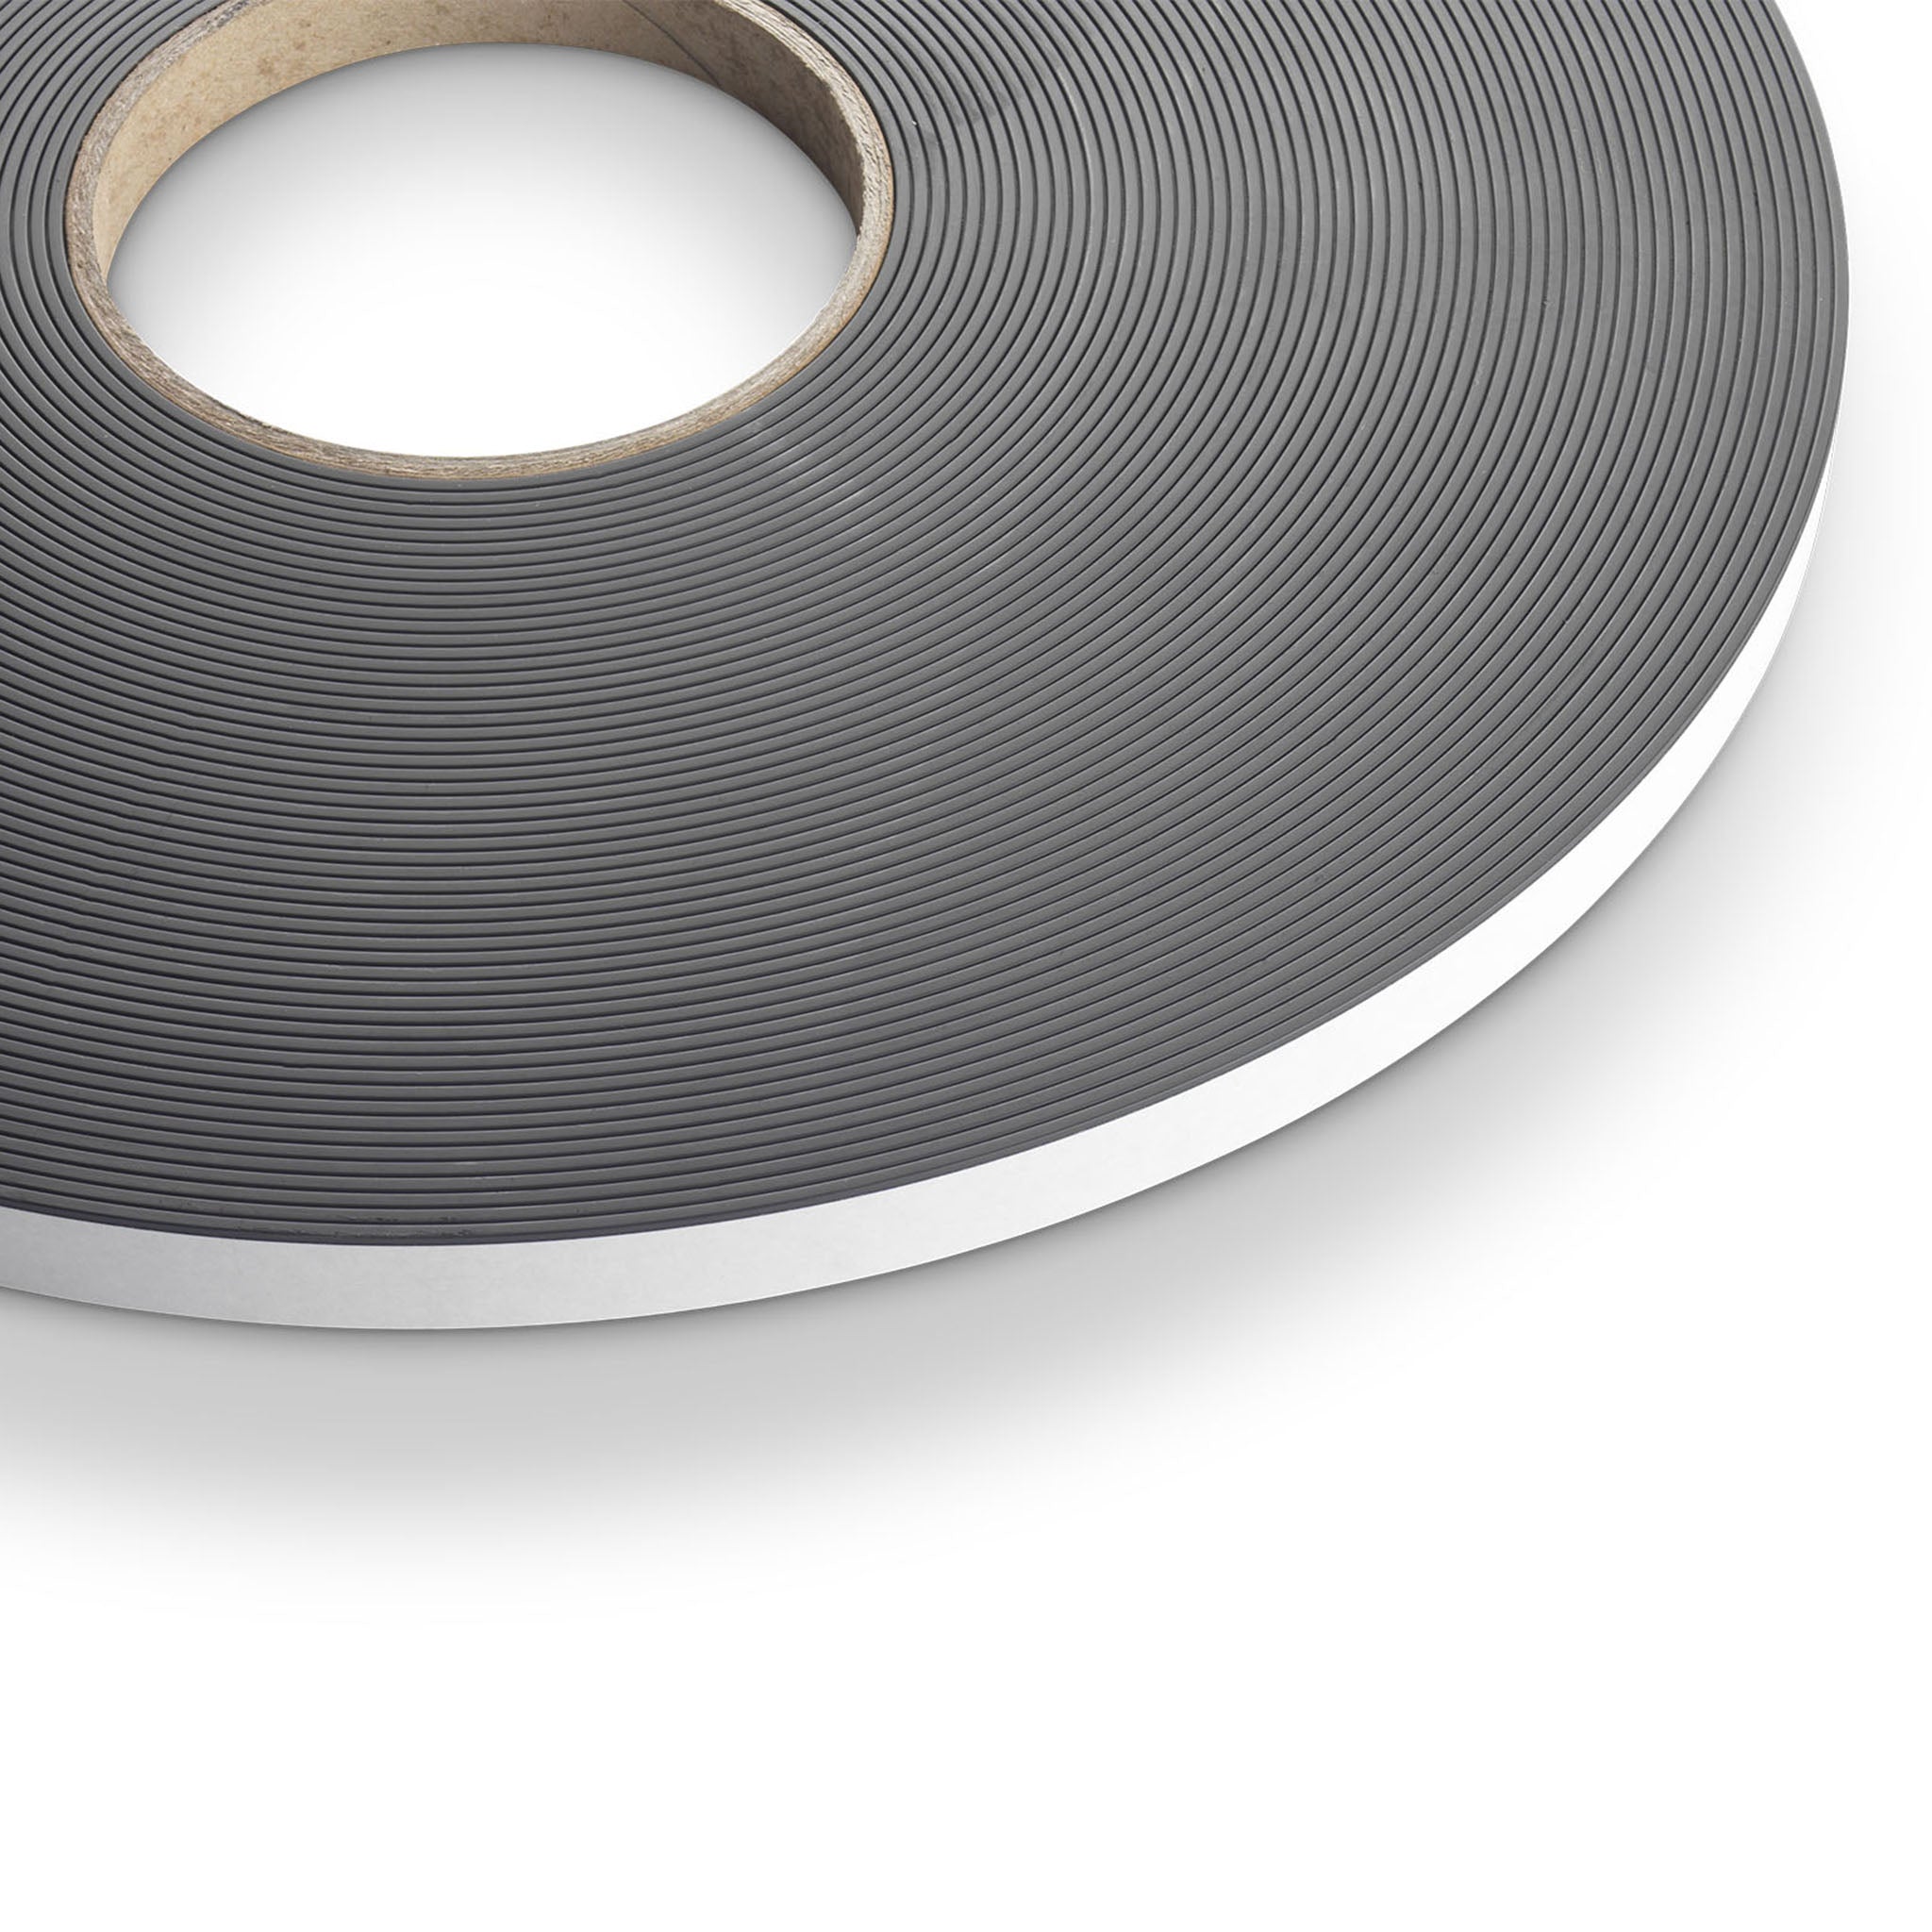  Magnetic Tape A+B - 3.3 Feet x 0.6 Inches x 0.07